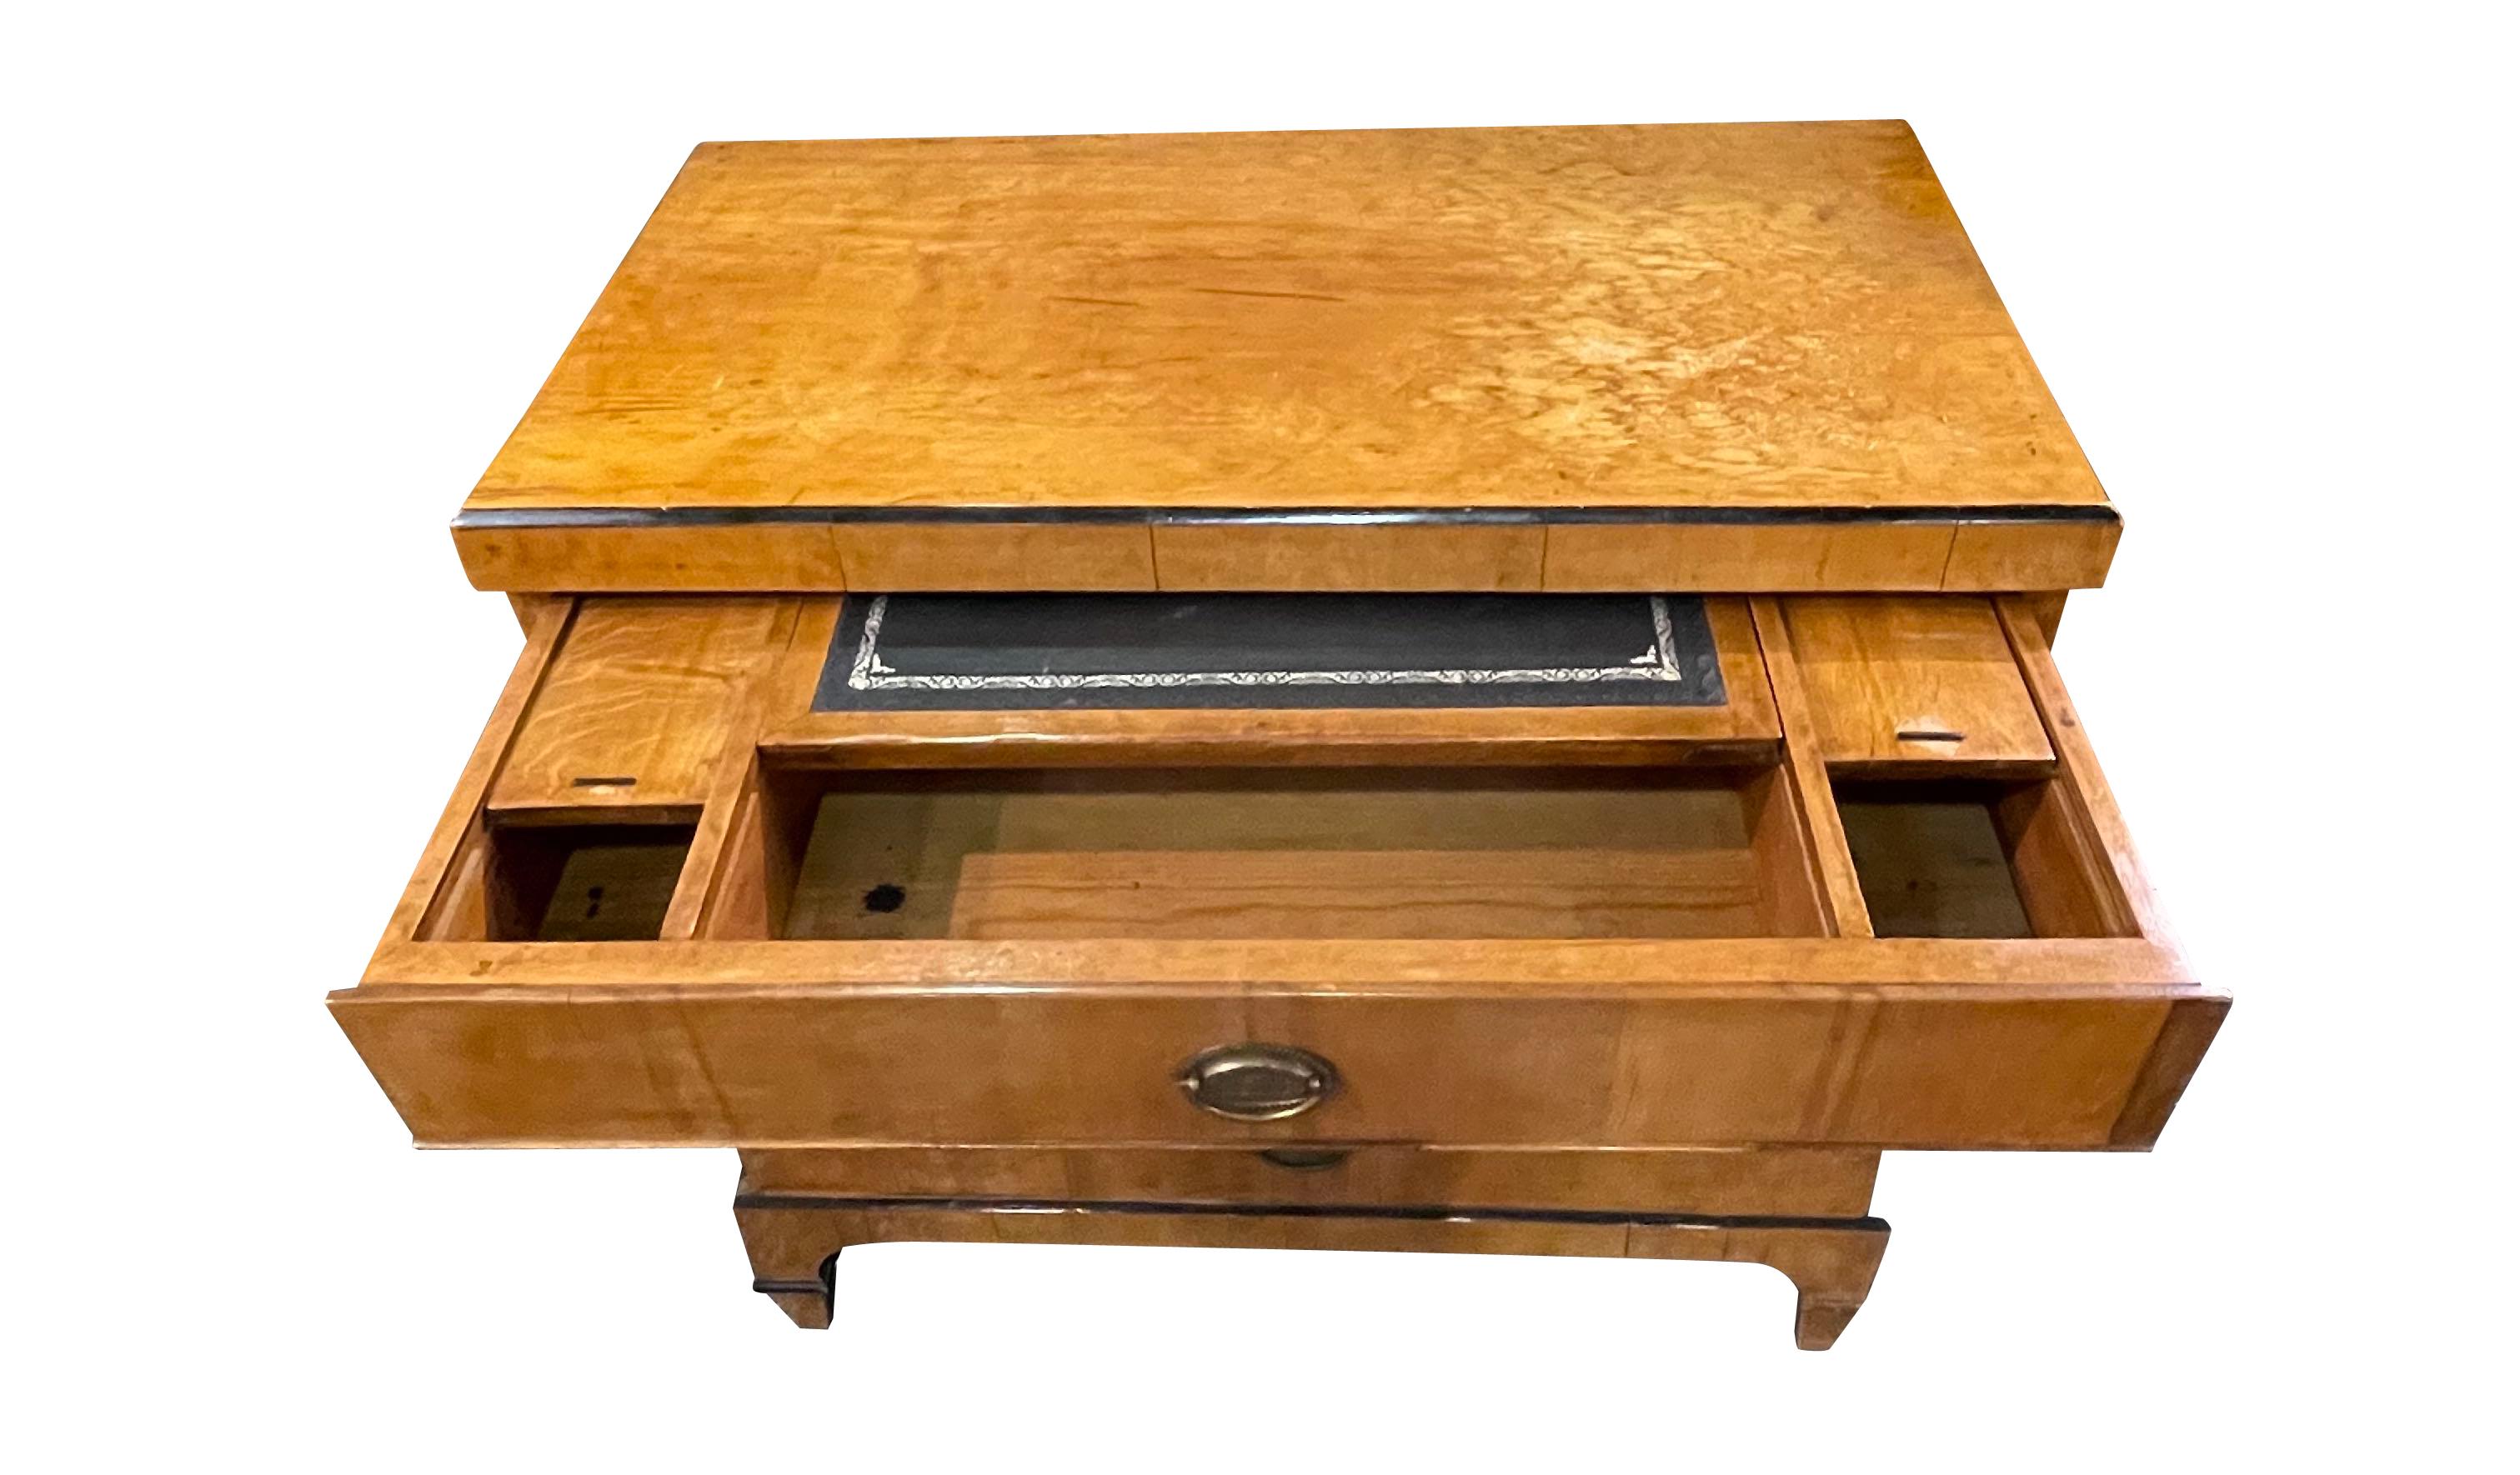 19th Century Austrian Biedermeier three drawer commode with top drawer pullout desk top.
Sliding black leather writing surface with two sliding hidden compartments.
Unusual semi circle designed fascade.
Signature ebonized trim detailing.
Burled